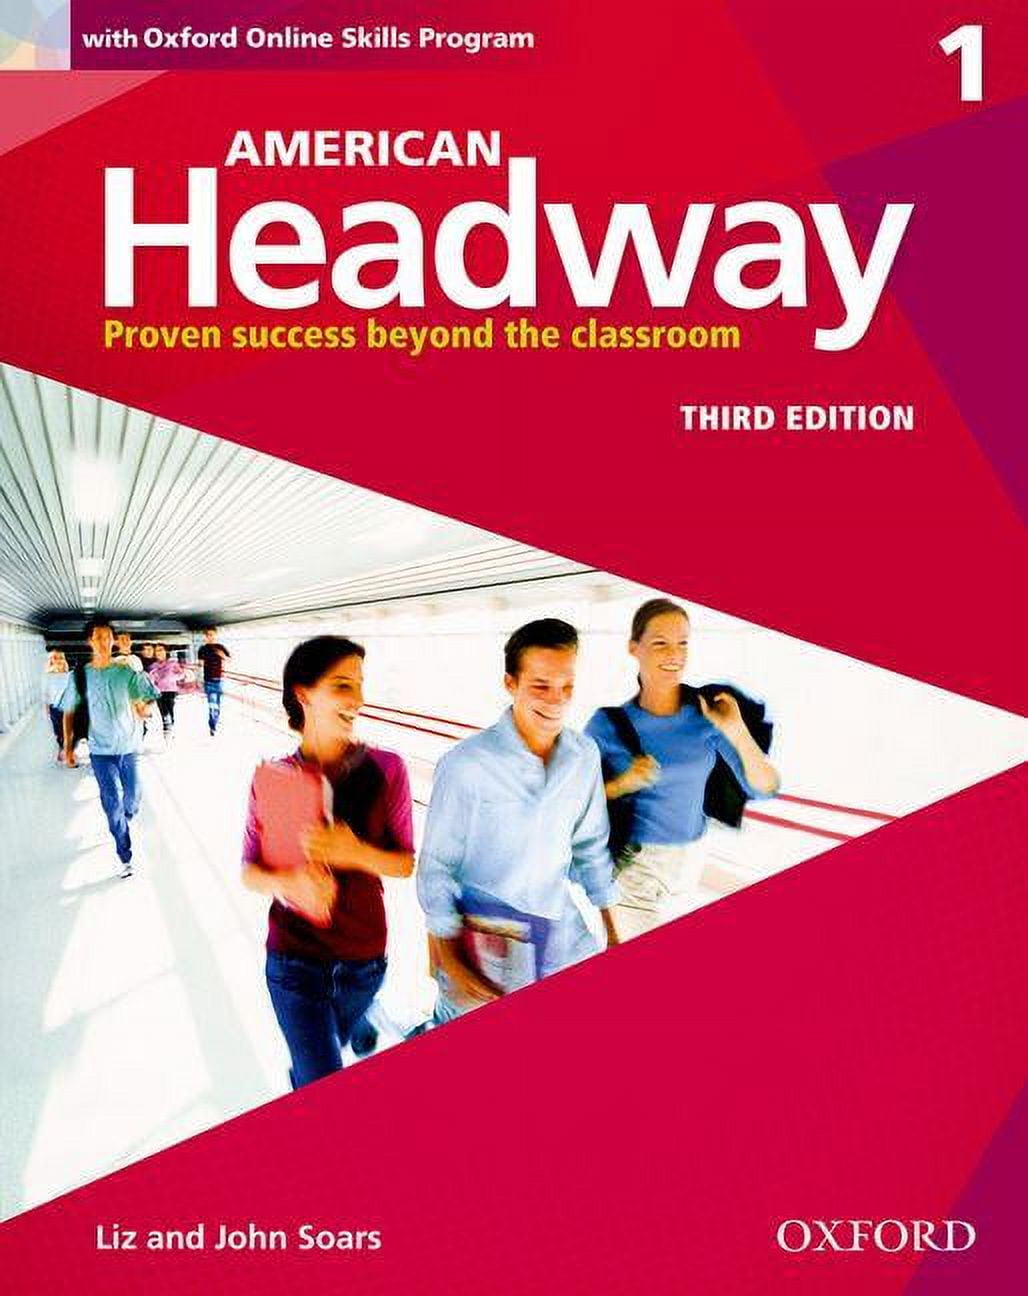 Oxford　Headway　Student　Skills　Book　Pack　Practice　Third　American　(Edition　3)　Level　Edition:　Online　With　(Paperback)